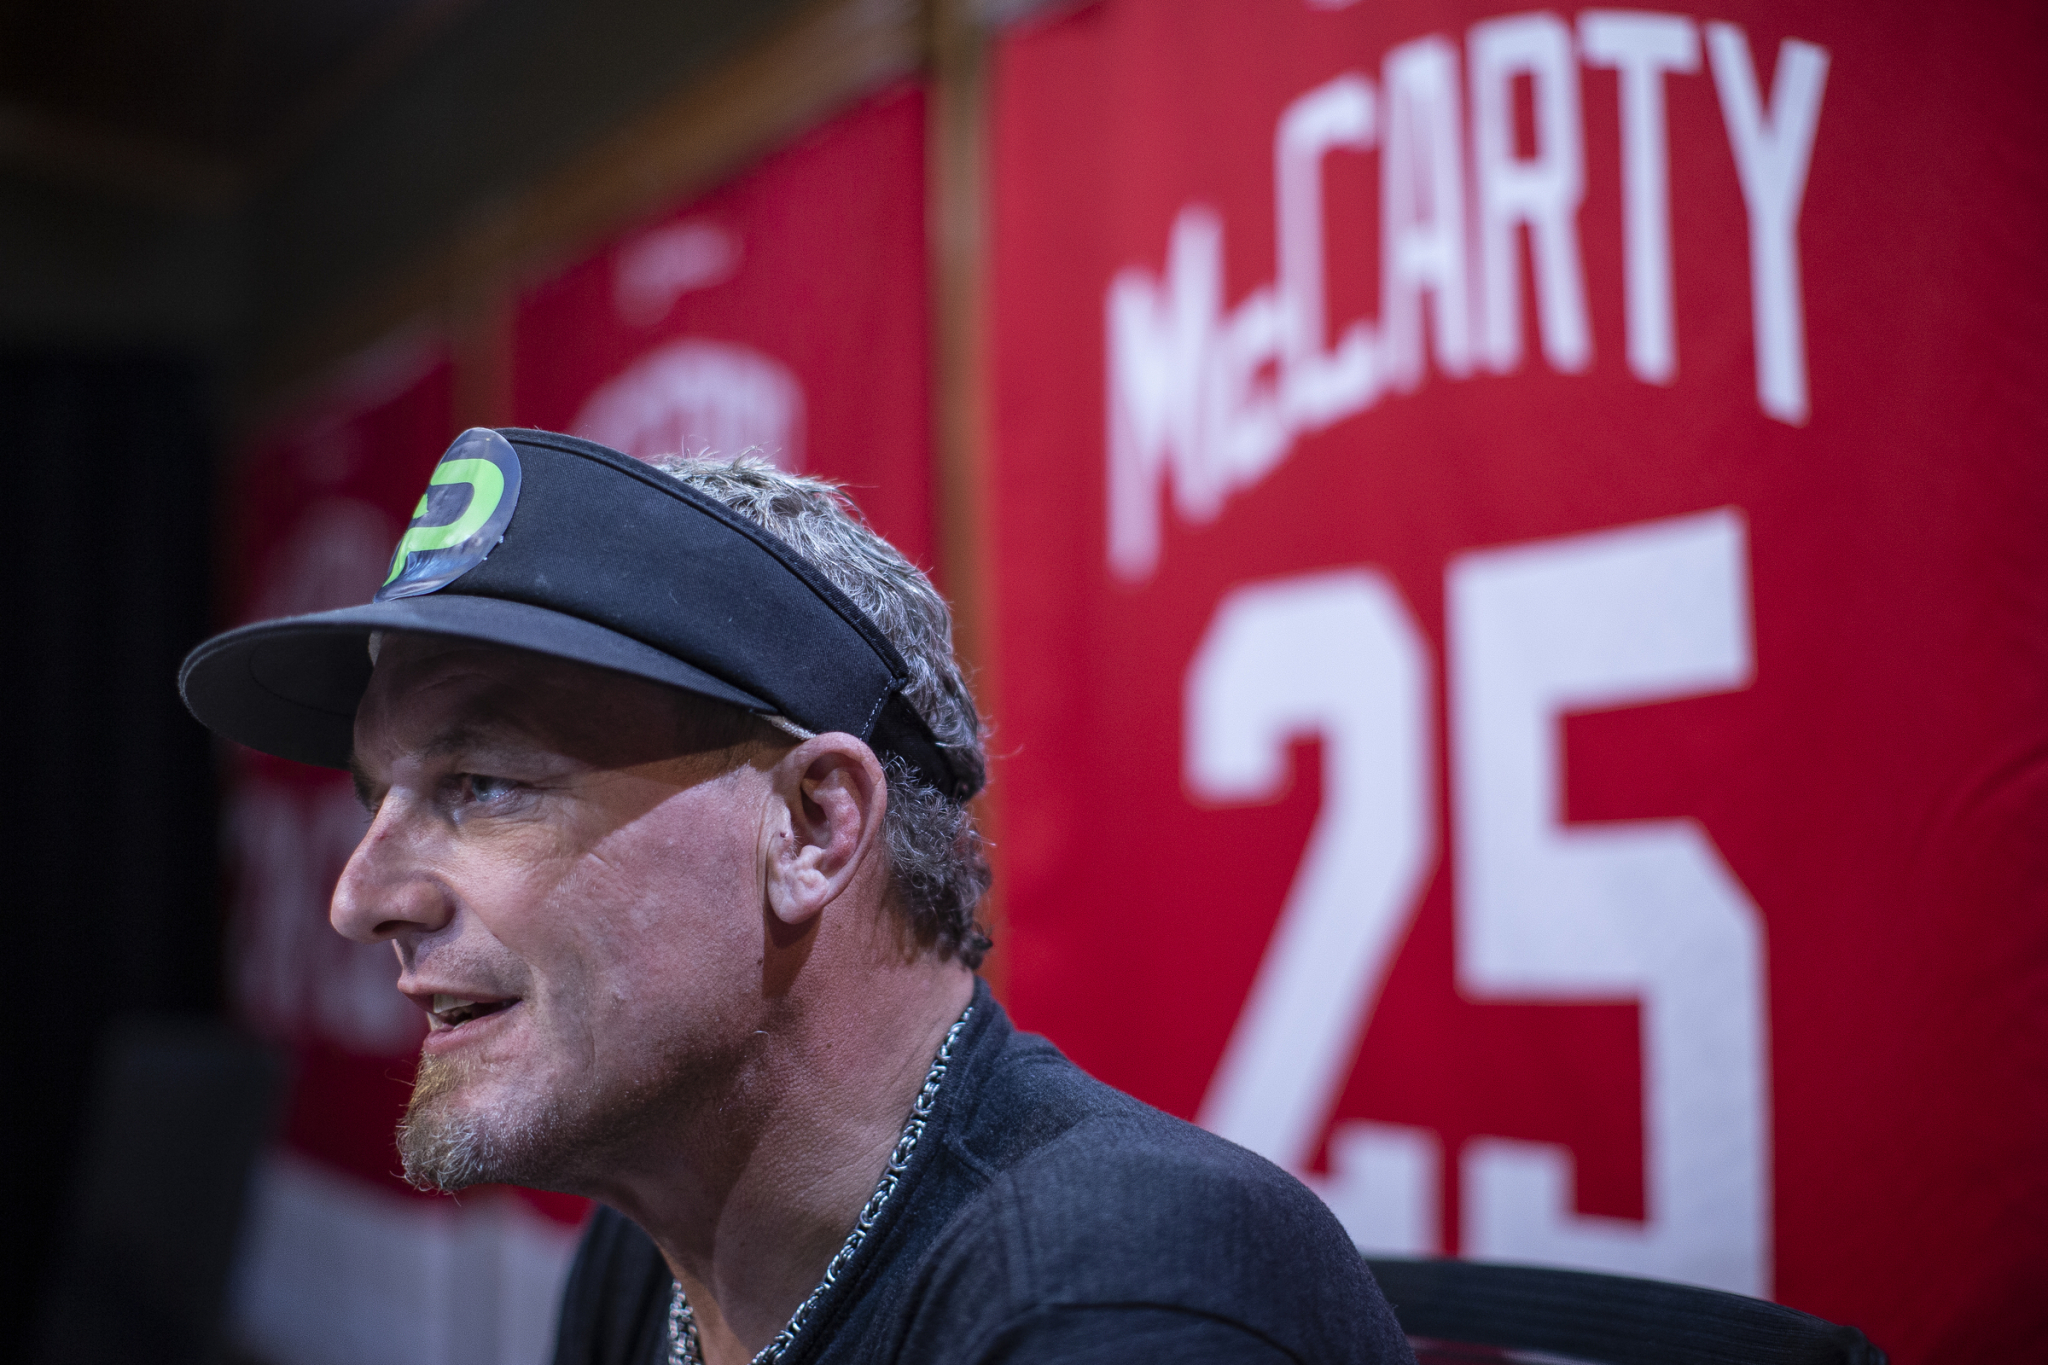 McCarty, 4-time Red Wings Stanley Cup Champion returns to the Thumb